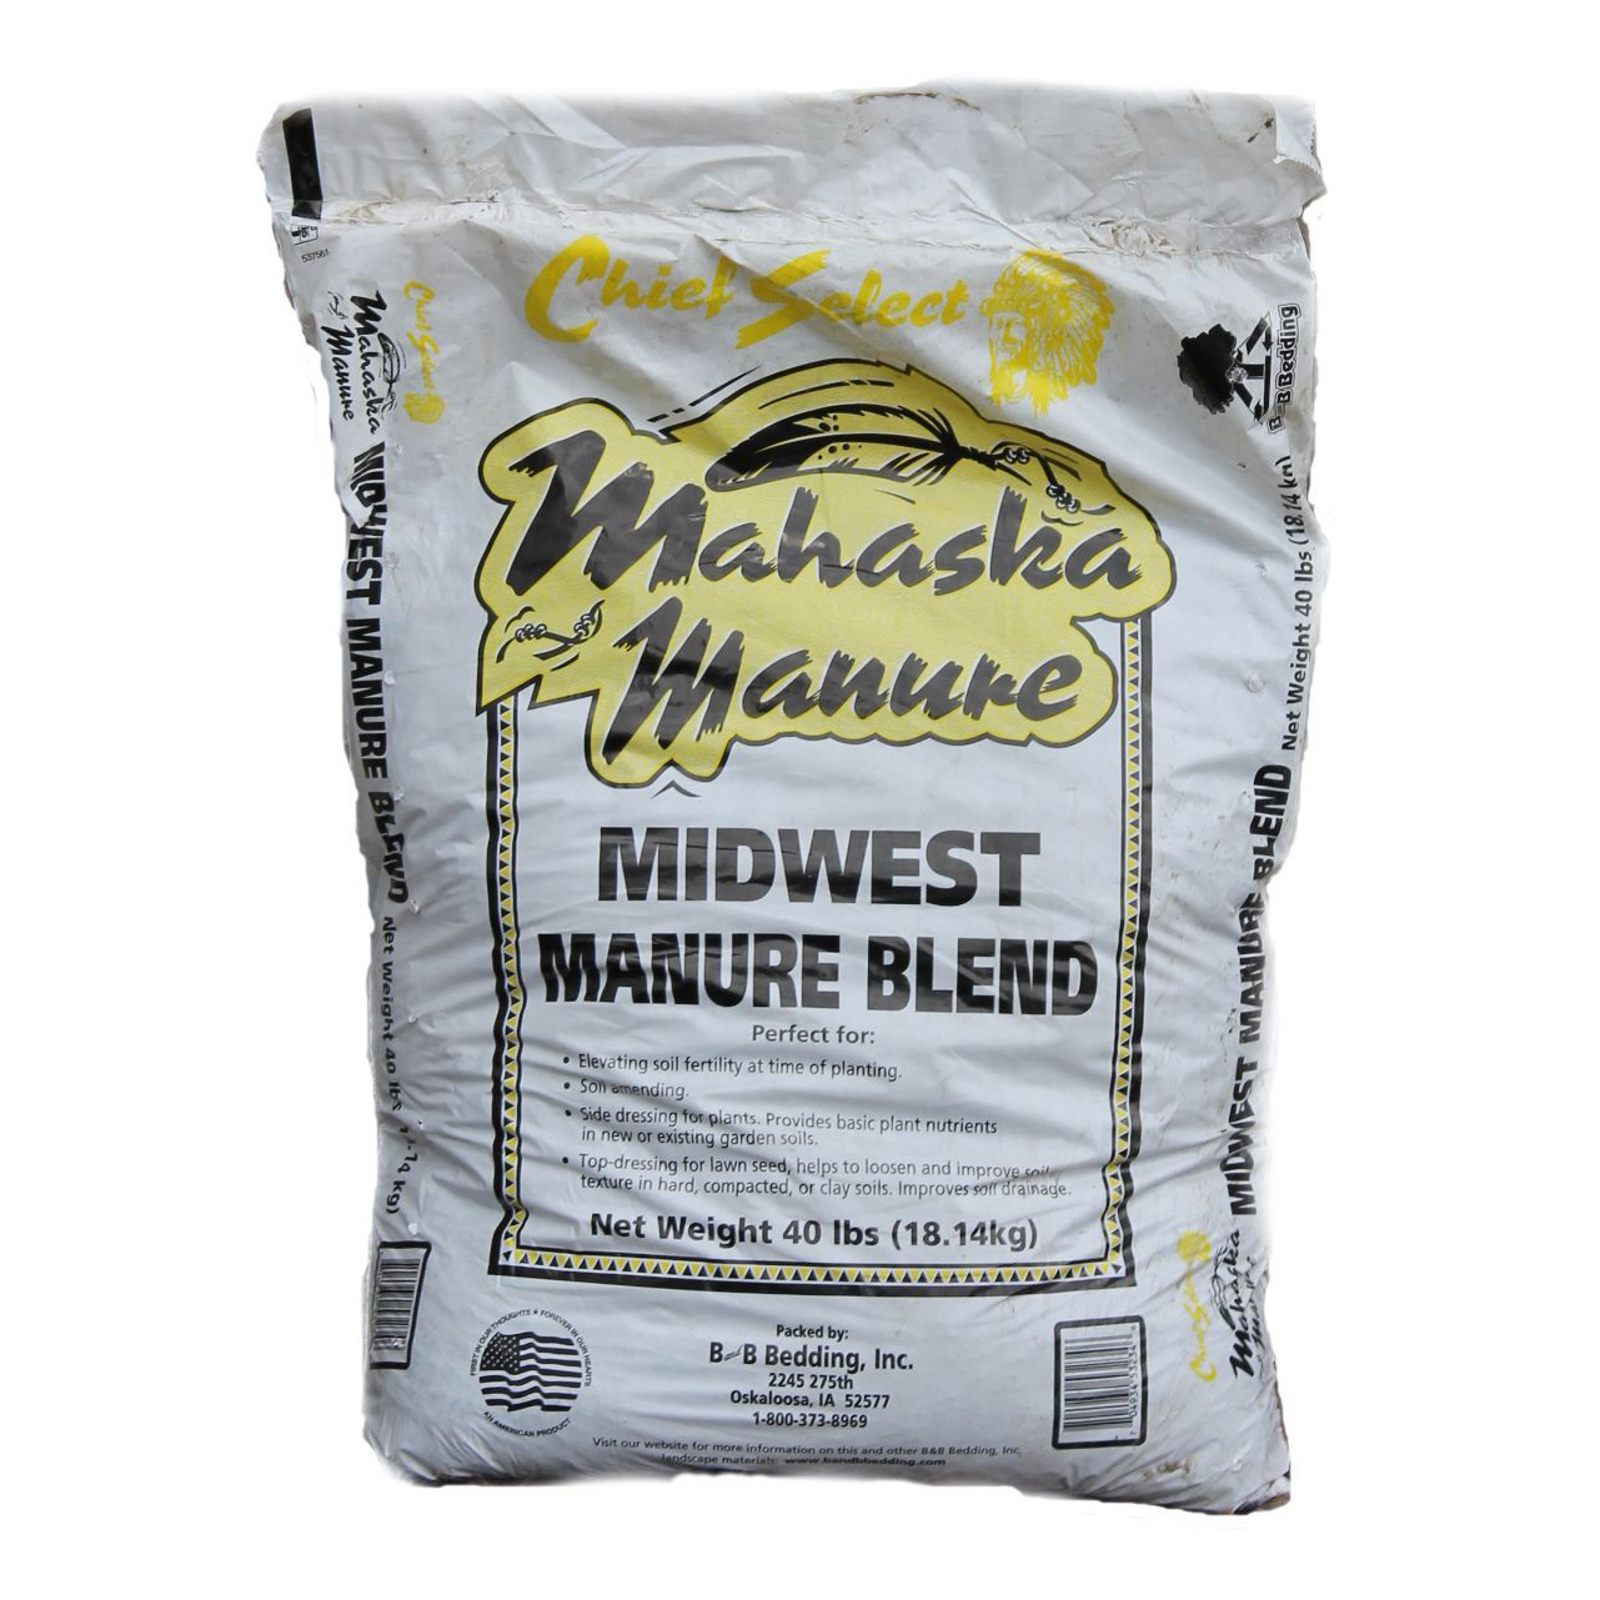 4400 Chief Select Midwest Manure